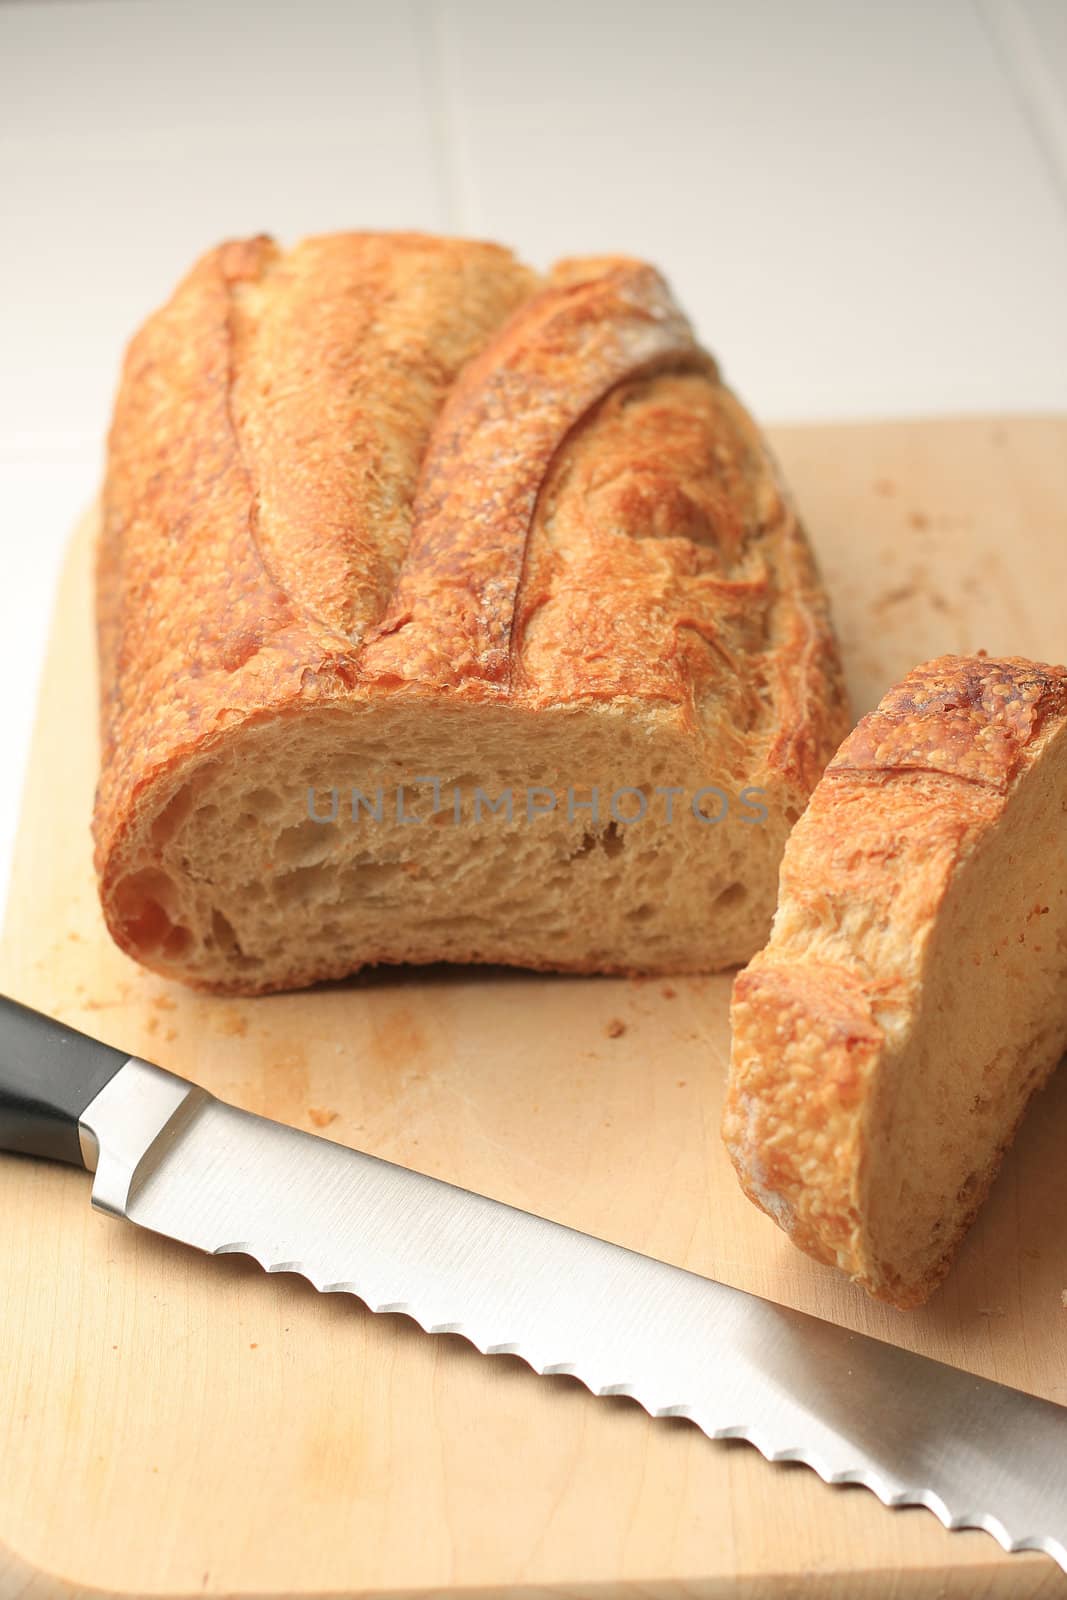 Loaf of bread on cutting board with knife